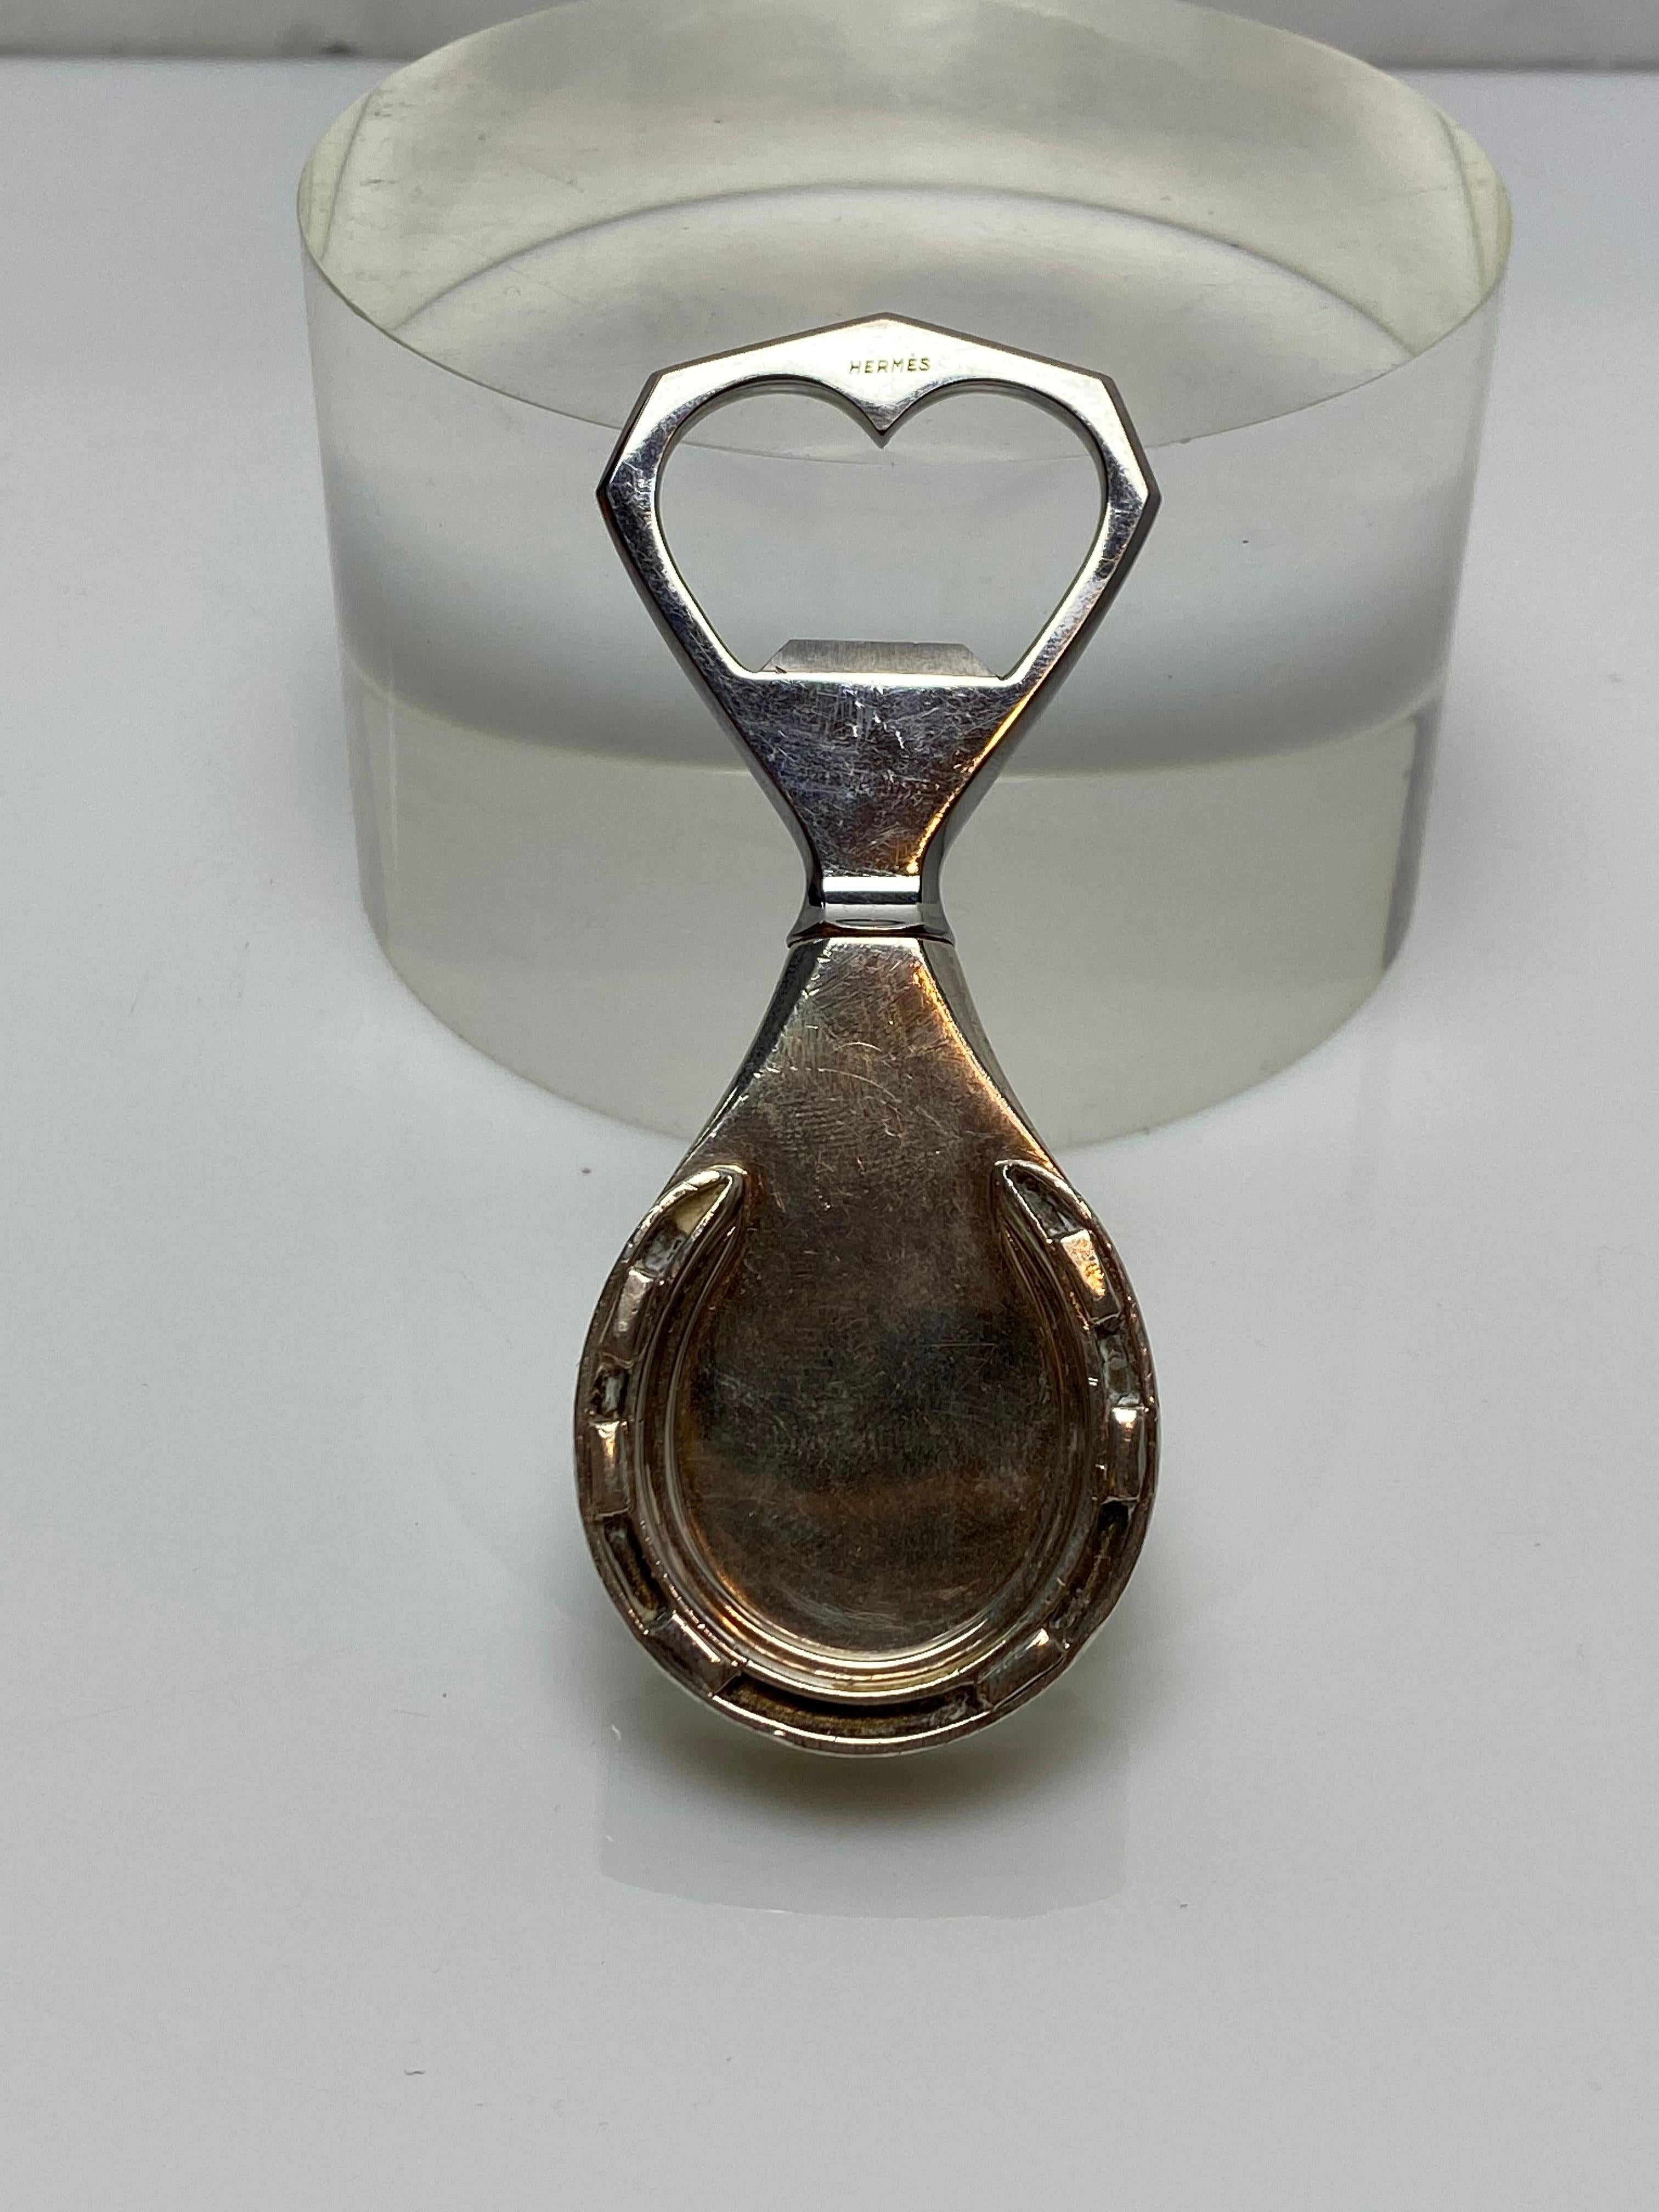 An elegant bottle opener by Hermes. The handle is formed in a tear drop shape with a figural horseshoe applied.

Made for Hermes by Ravinet D'enfert.